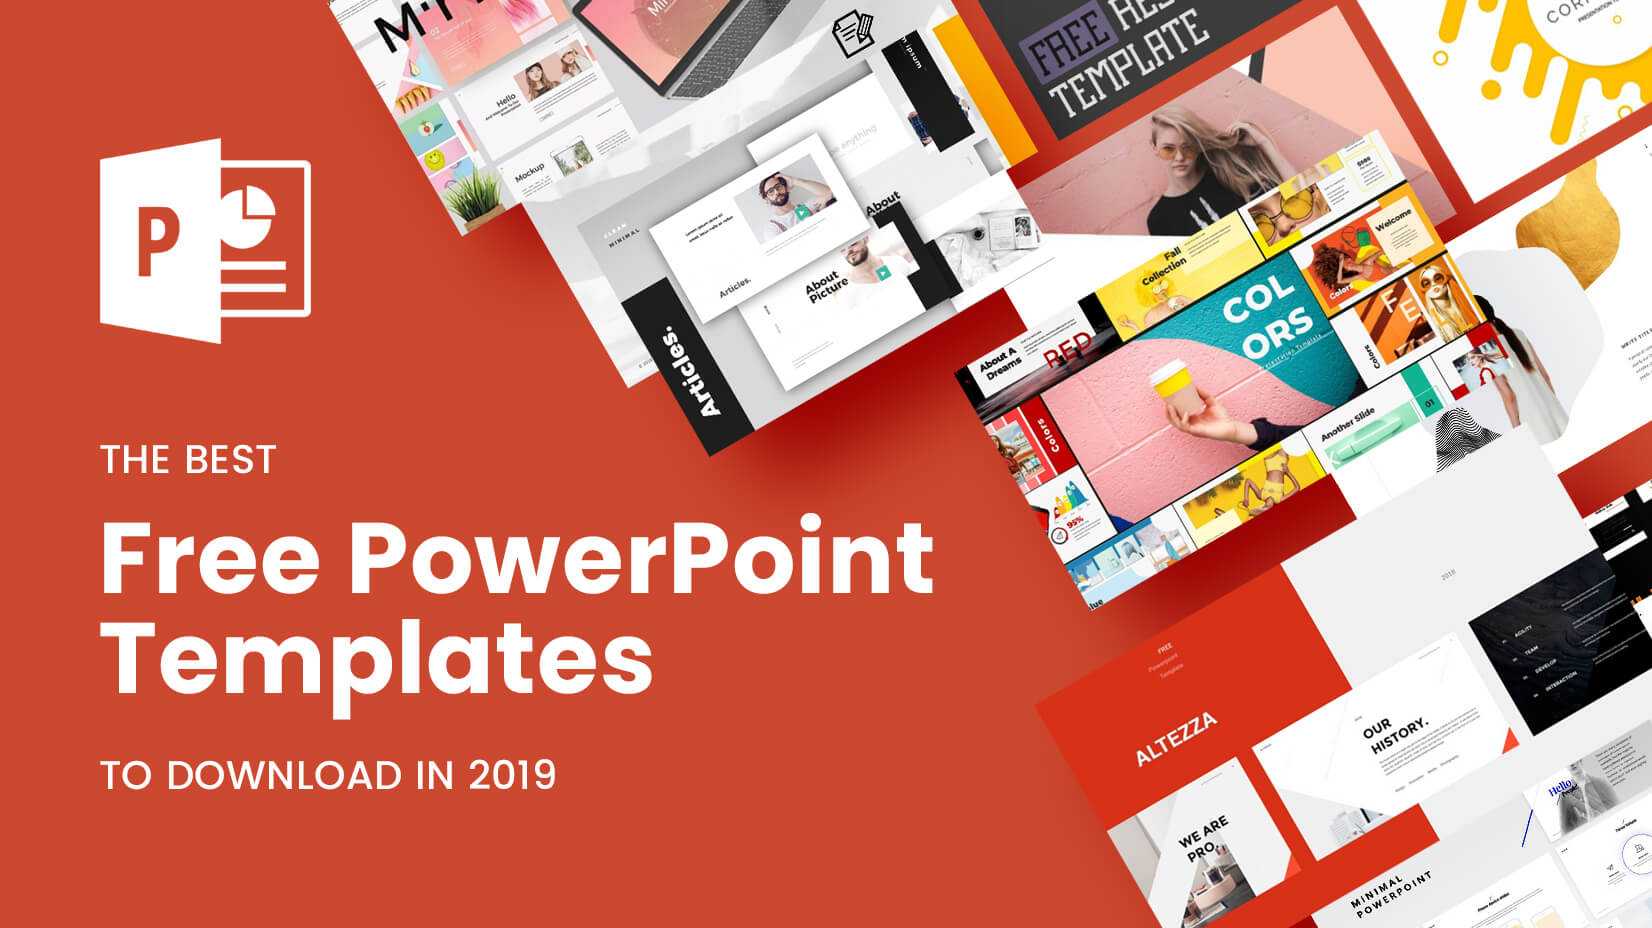 The Best Free Powerpoint Templates To Download In 2019 Regarding Powerpoint Slides Design Templates For Free